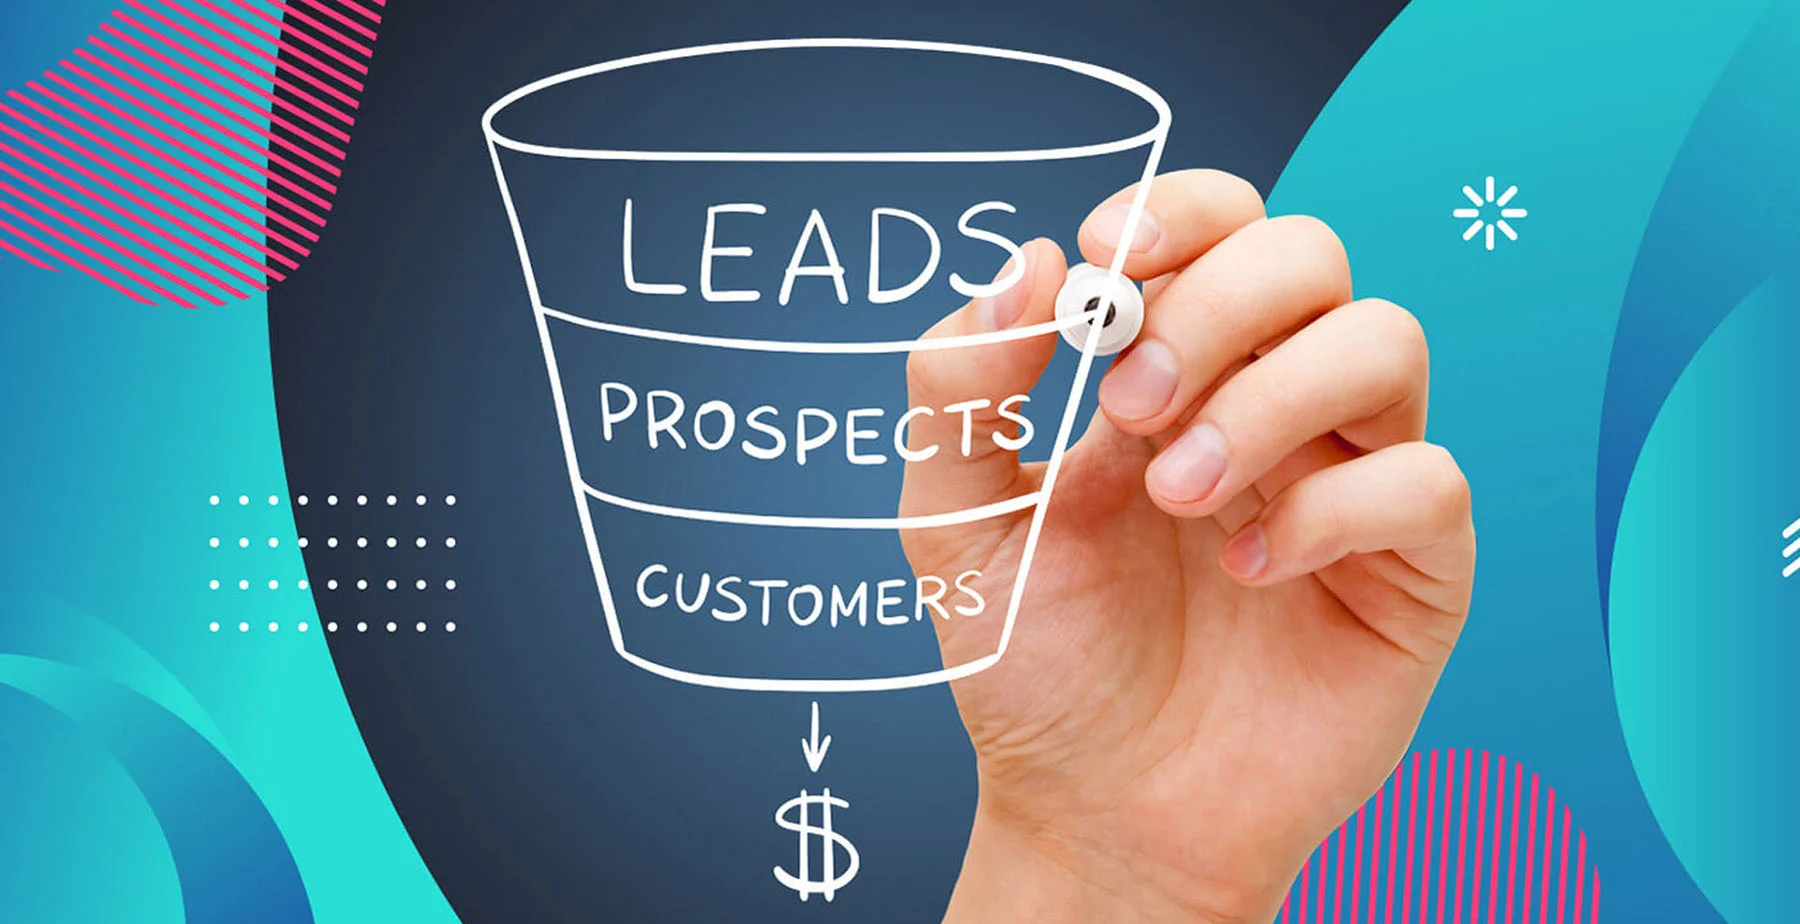 Finding More Leads: How to Increase Web Traffic and Brand Awareness